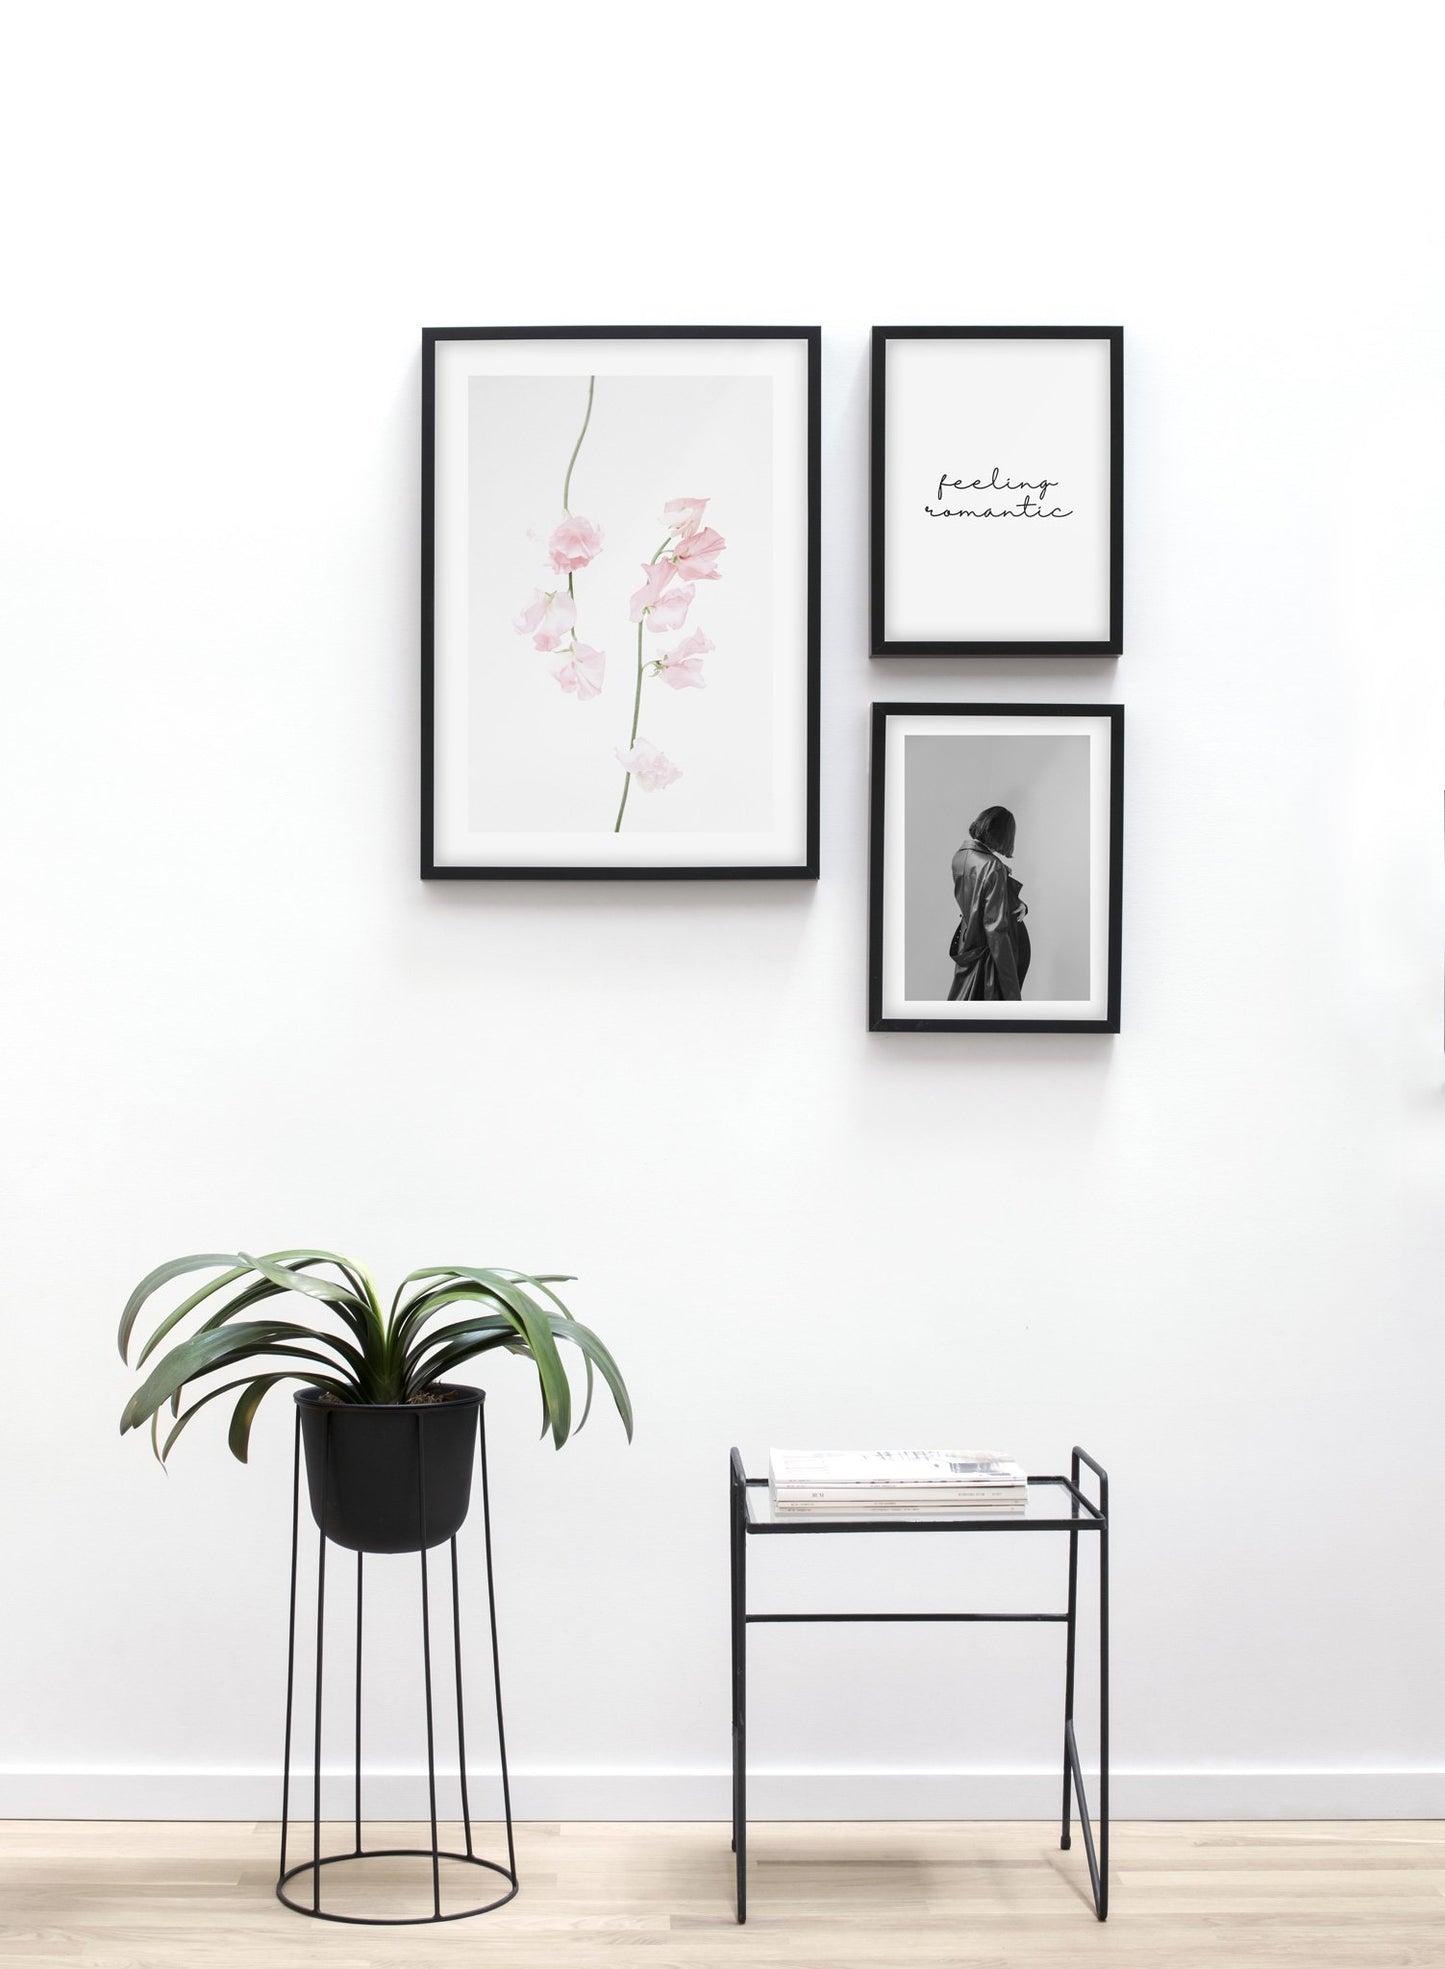 Minimalistic wall photography by Opposite Wall with Dusty Pink floral photography - Design flower pot and a coffee table